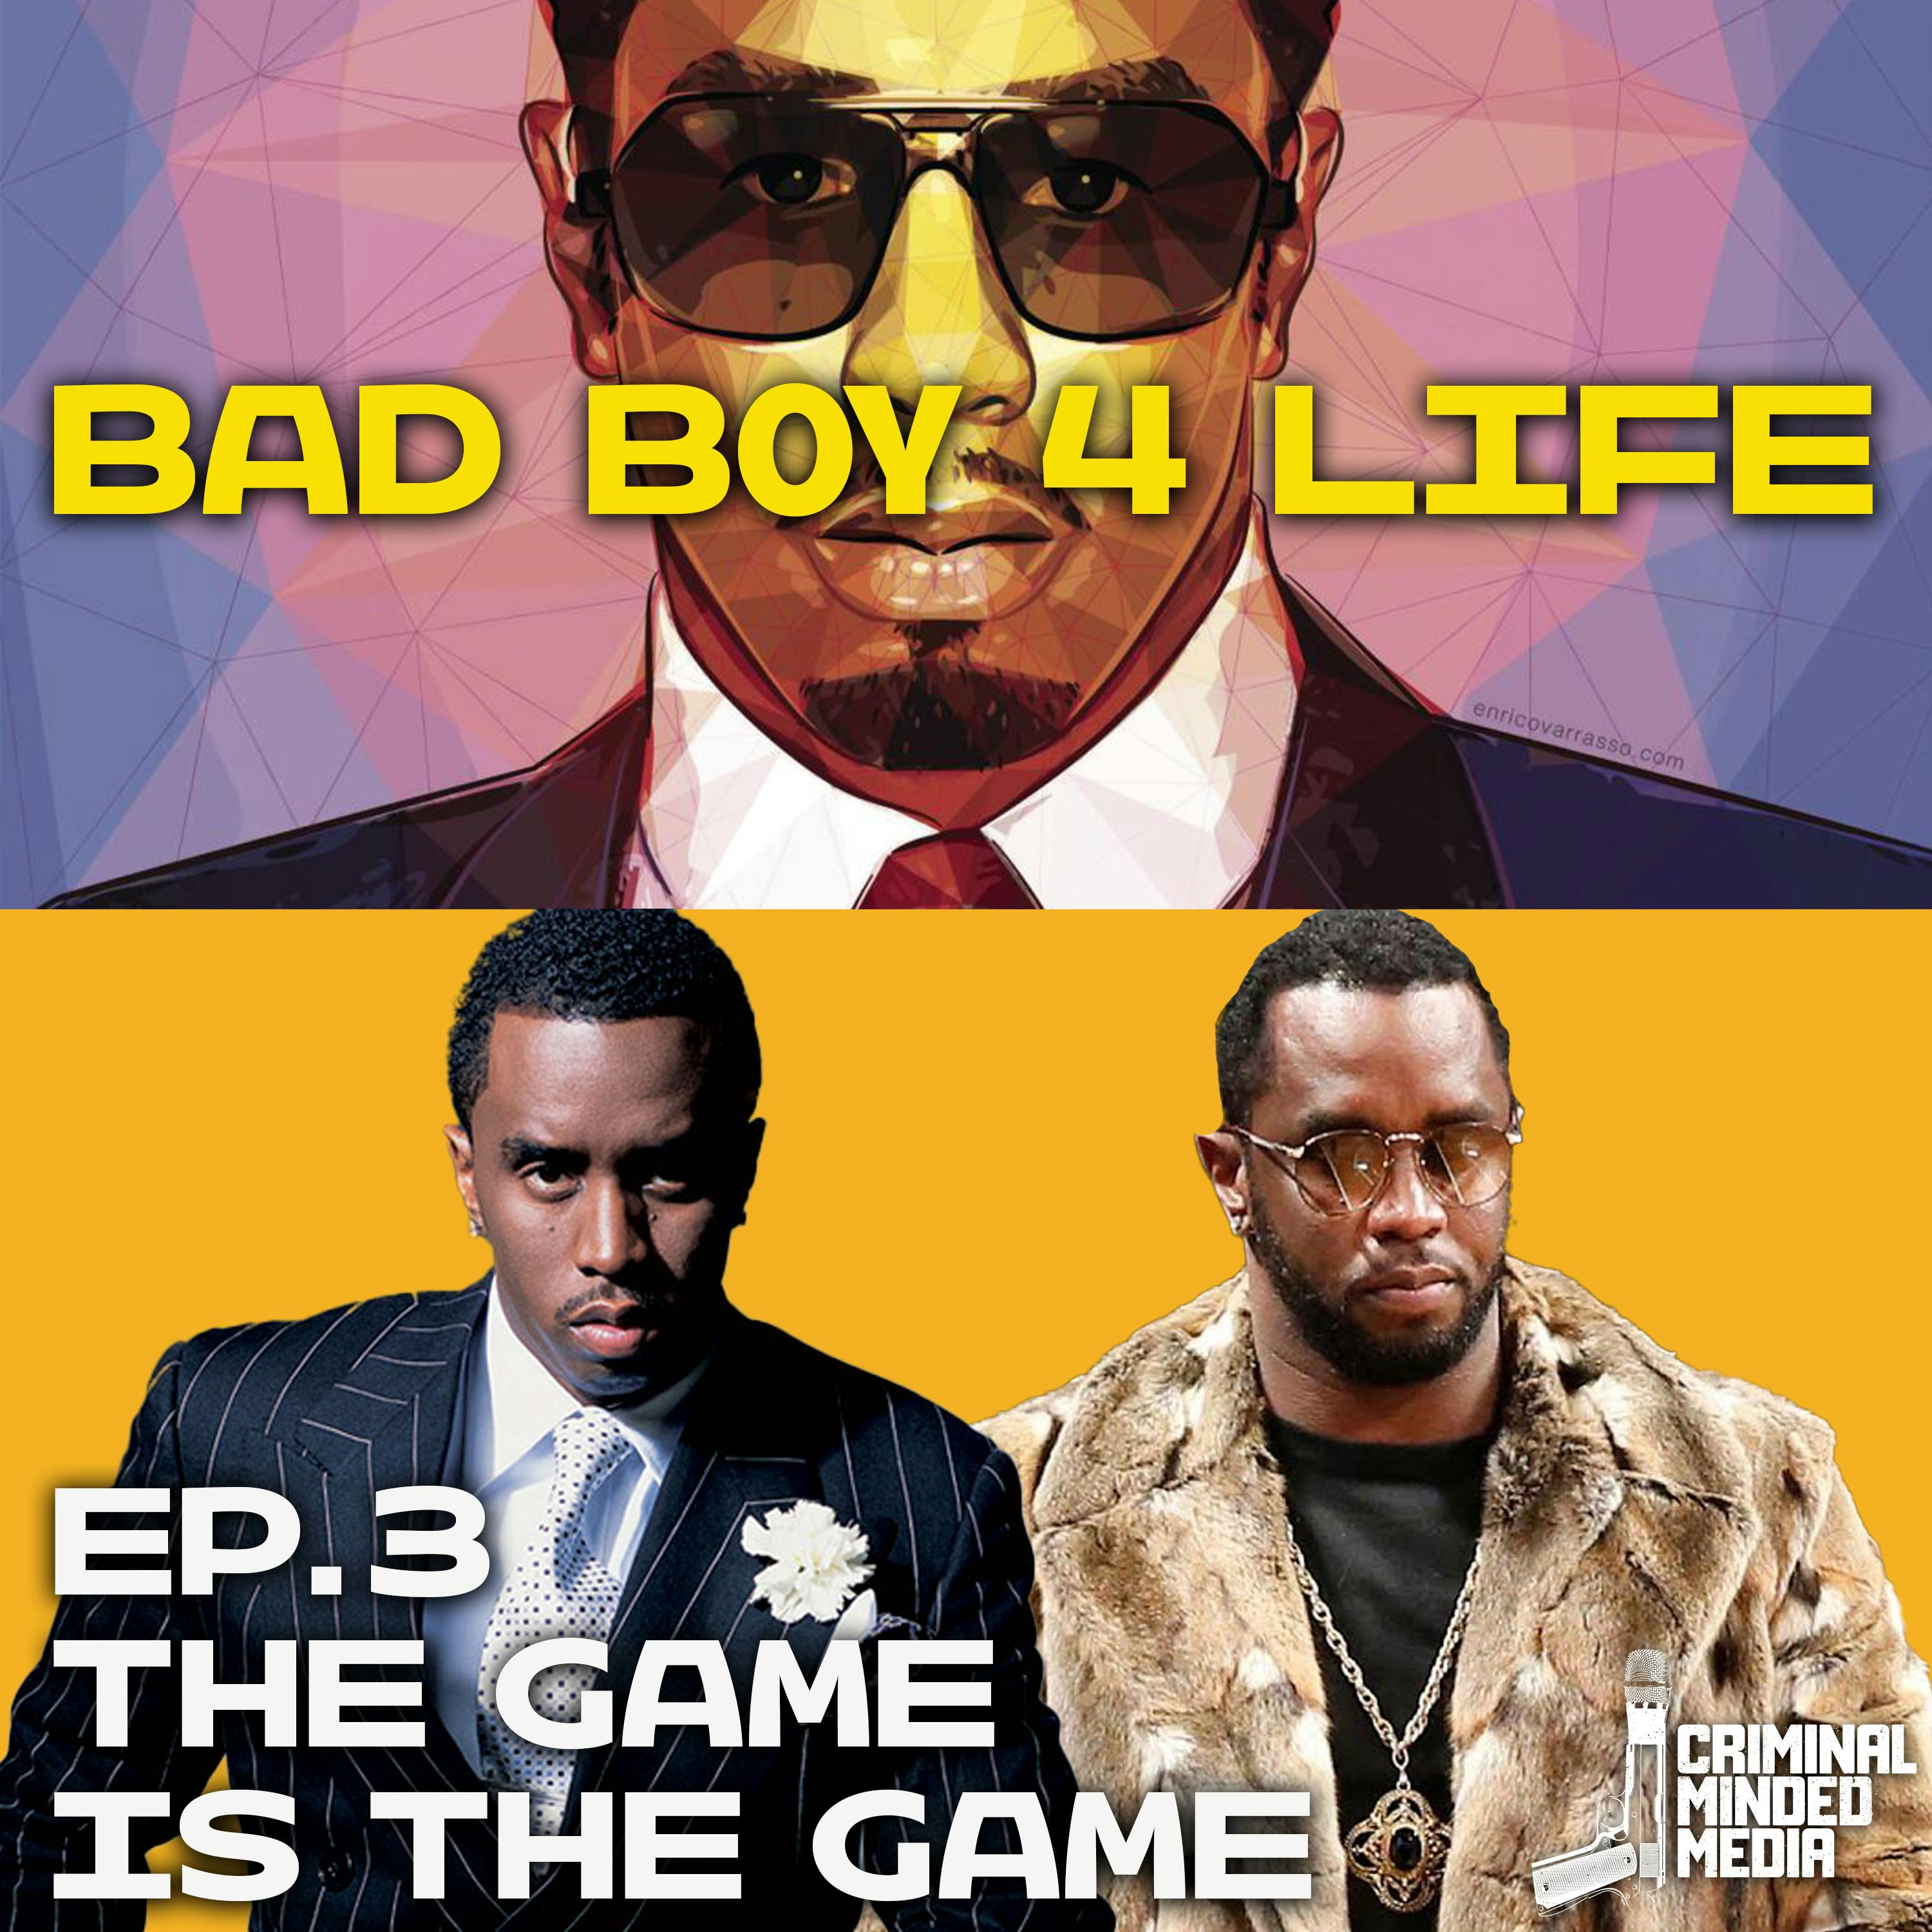 BAD BOY 4 LIFE EP. 3: THE GAME IS THE GAME